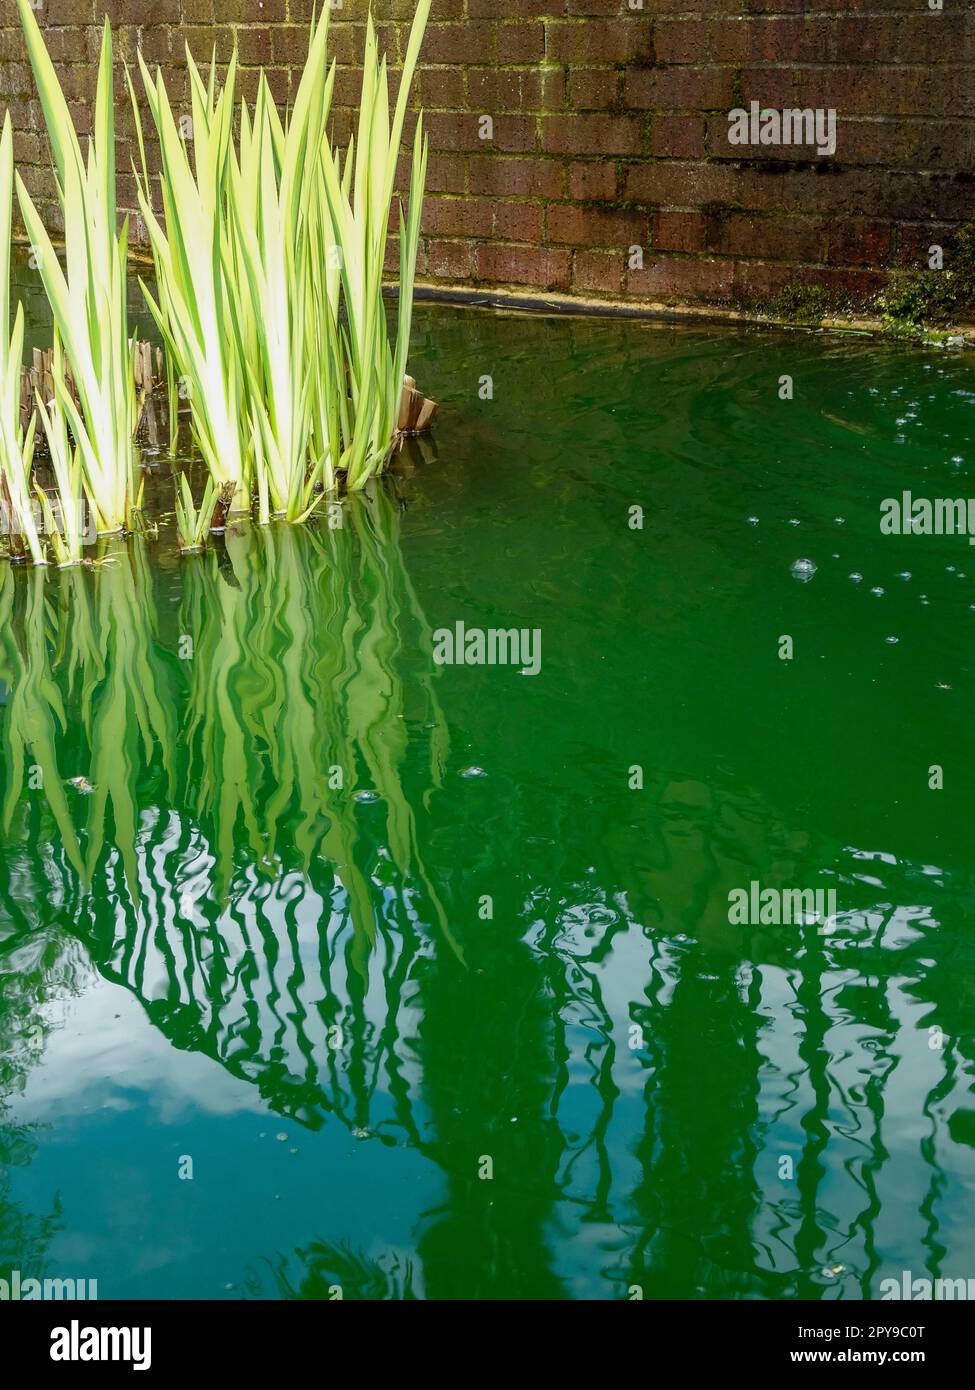 Newly emerging fans of leaves of iris Pseudacorus -Variegatum.  Semi abstract garden pond image in spring Stock Photo